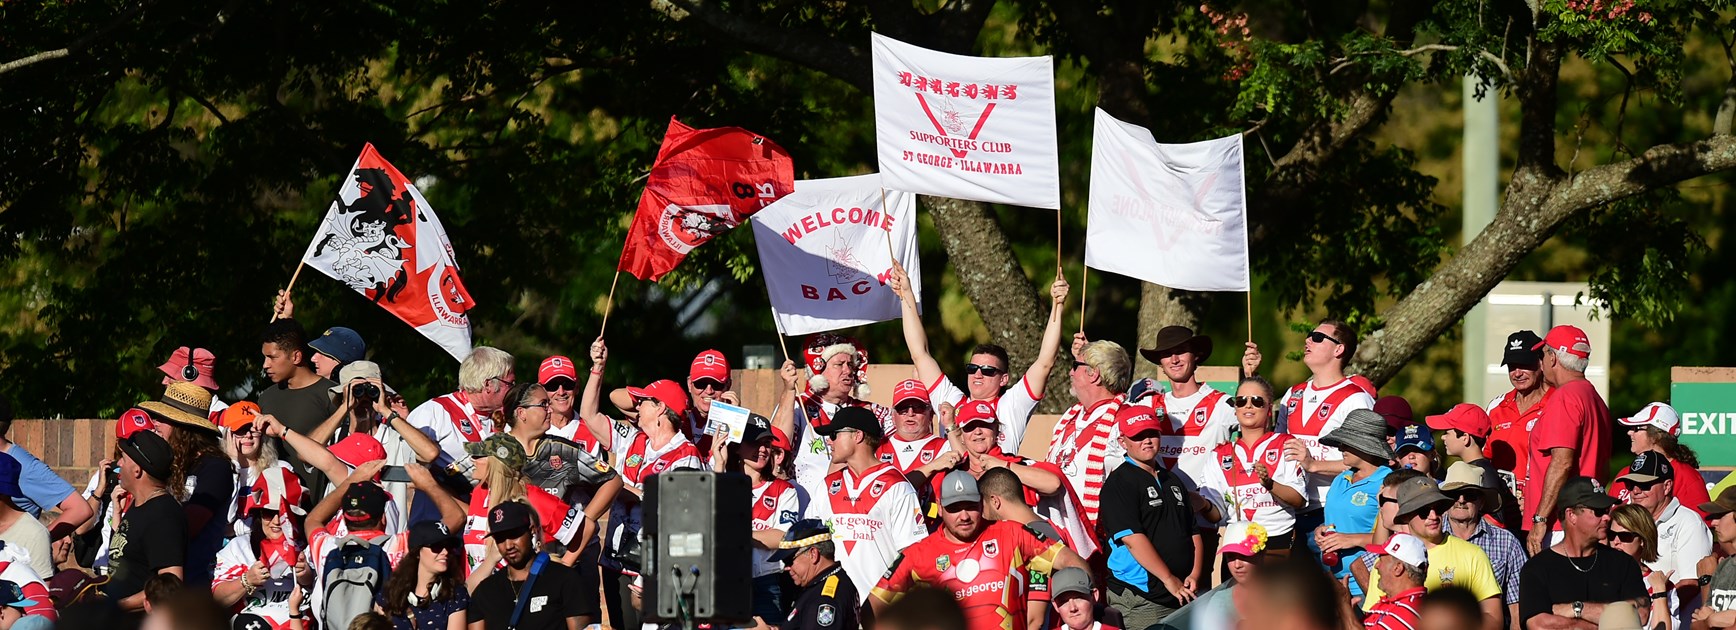 Game day guide: Round 23 v Roosters